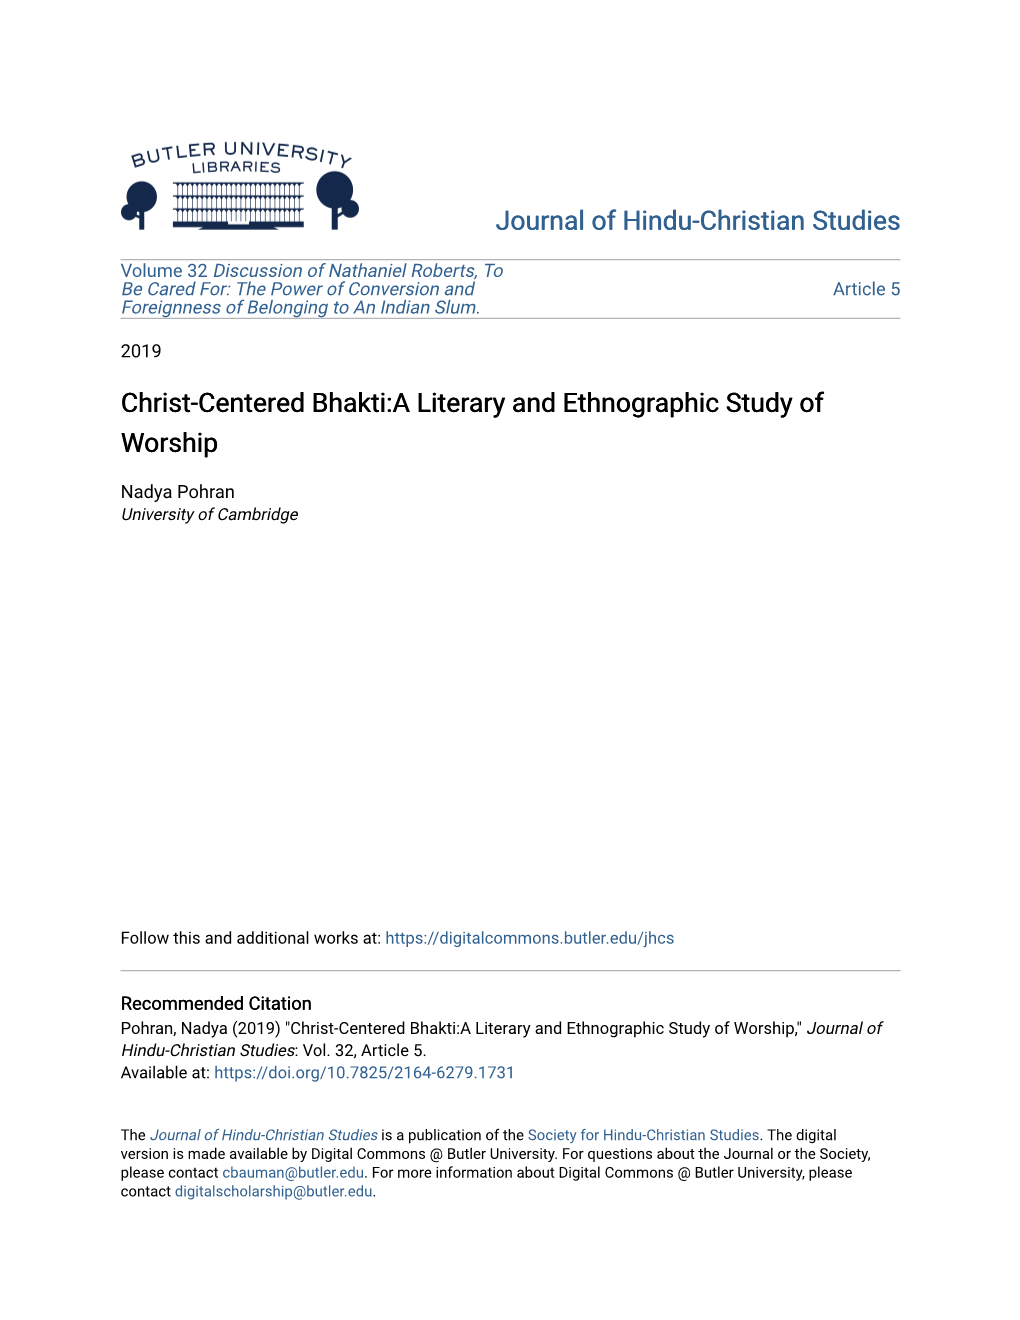 Christ-Centered Bhakti:A Literary and Ethnographic Study of Worship